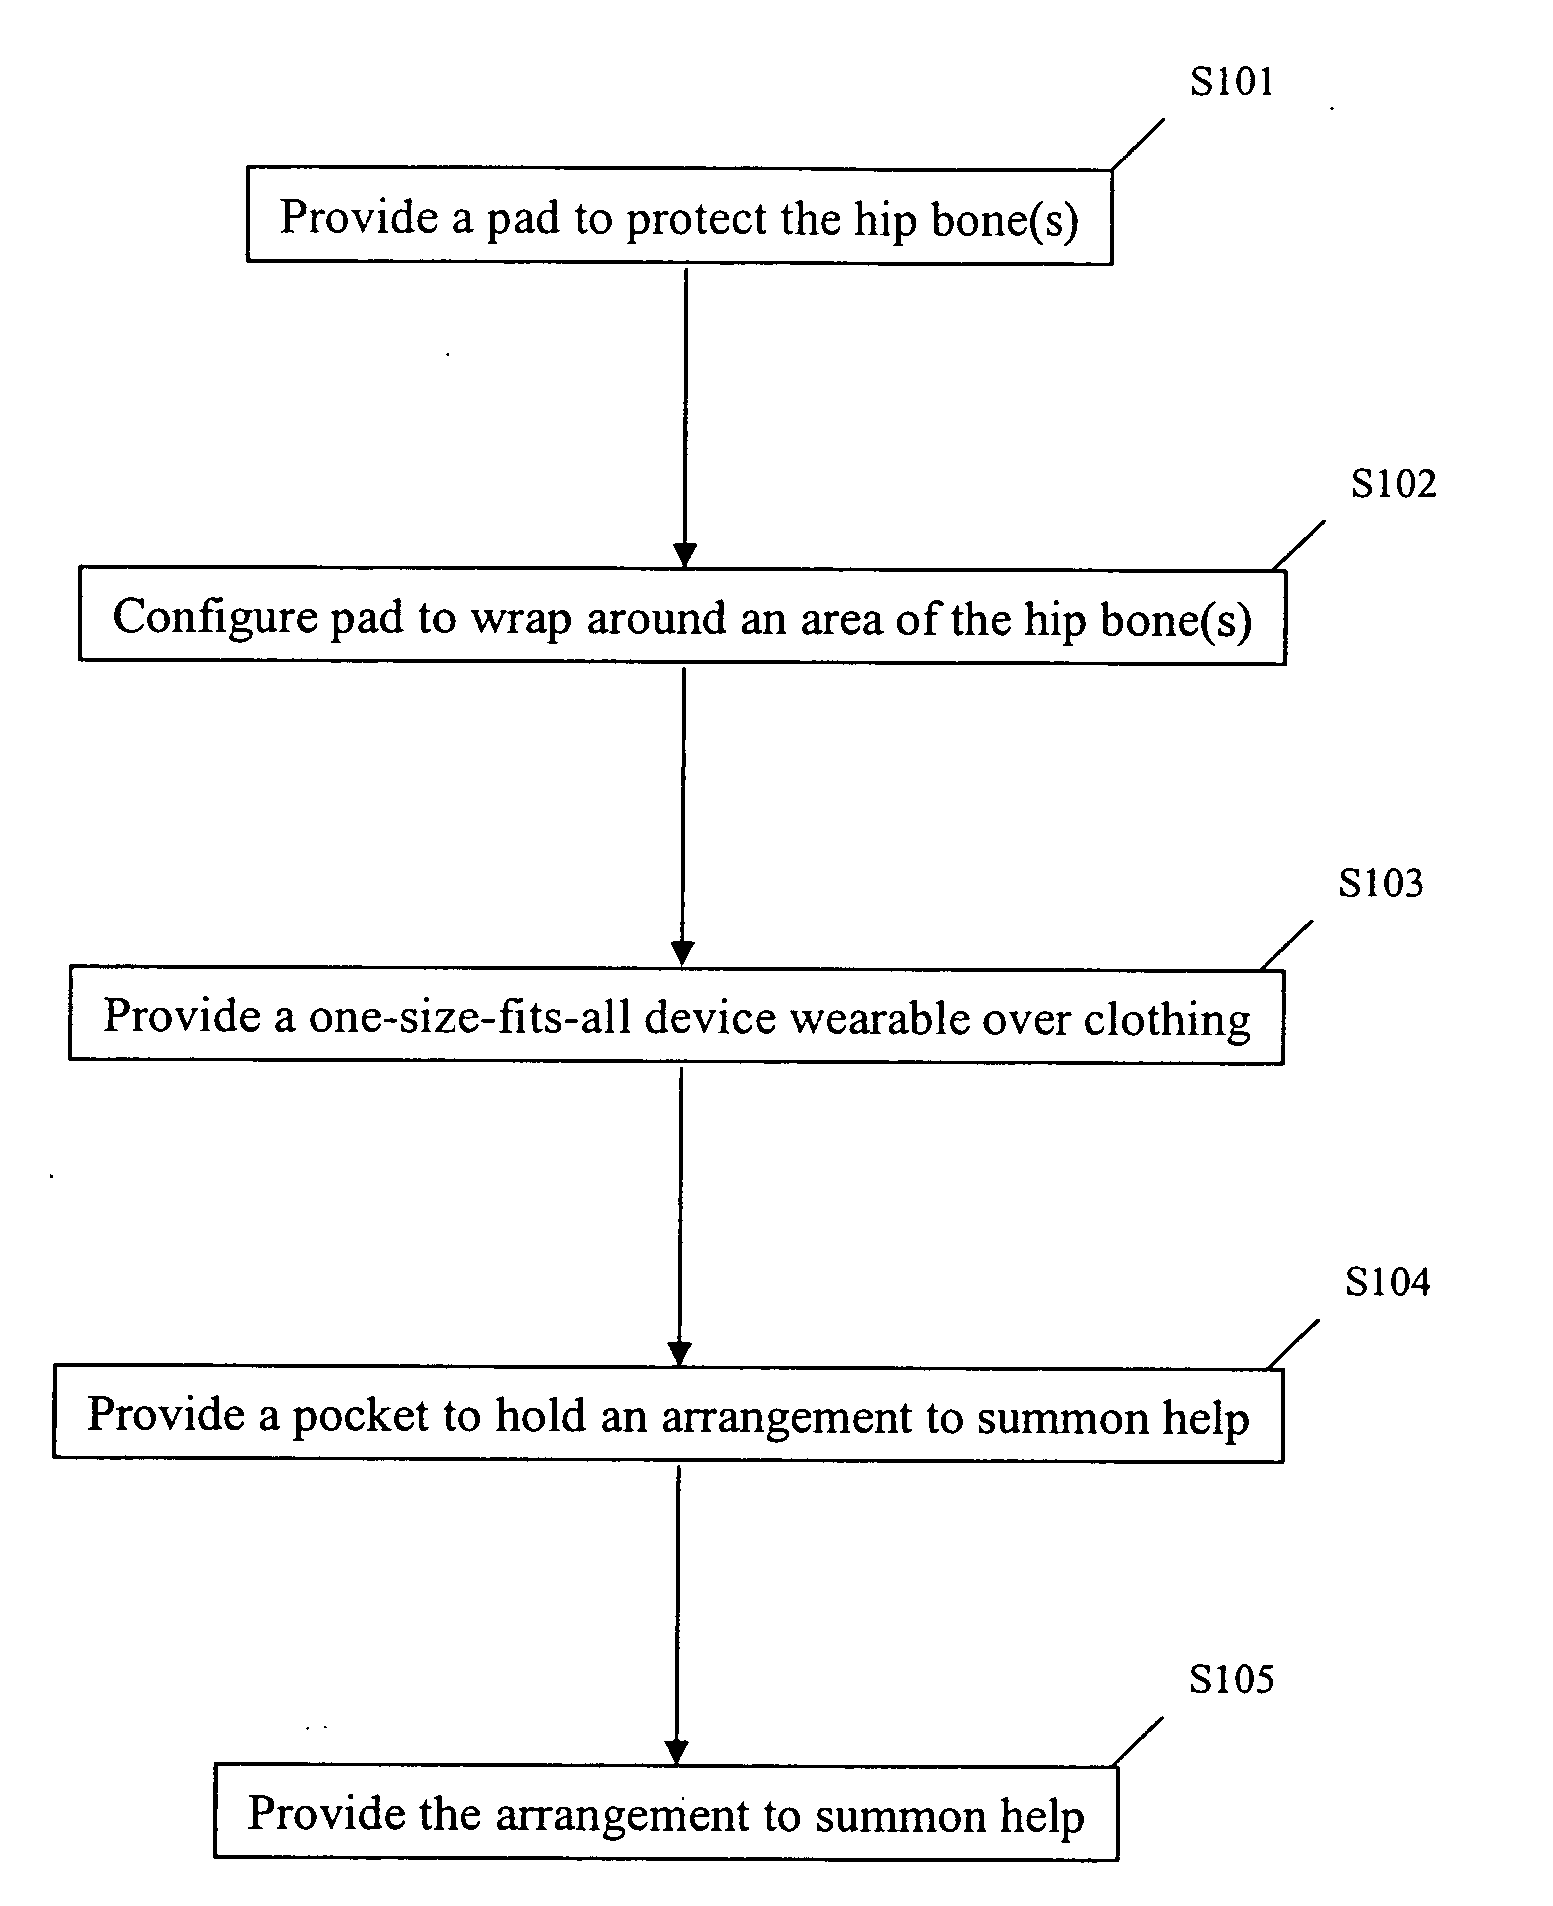 Apparatus, method and system for protecting hips from fracture, and for providing immediate response to hip fracture events